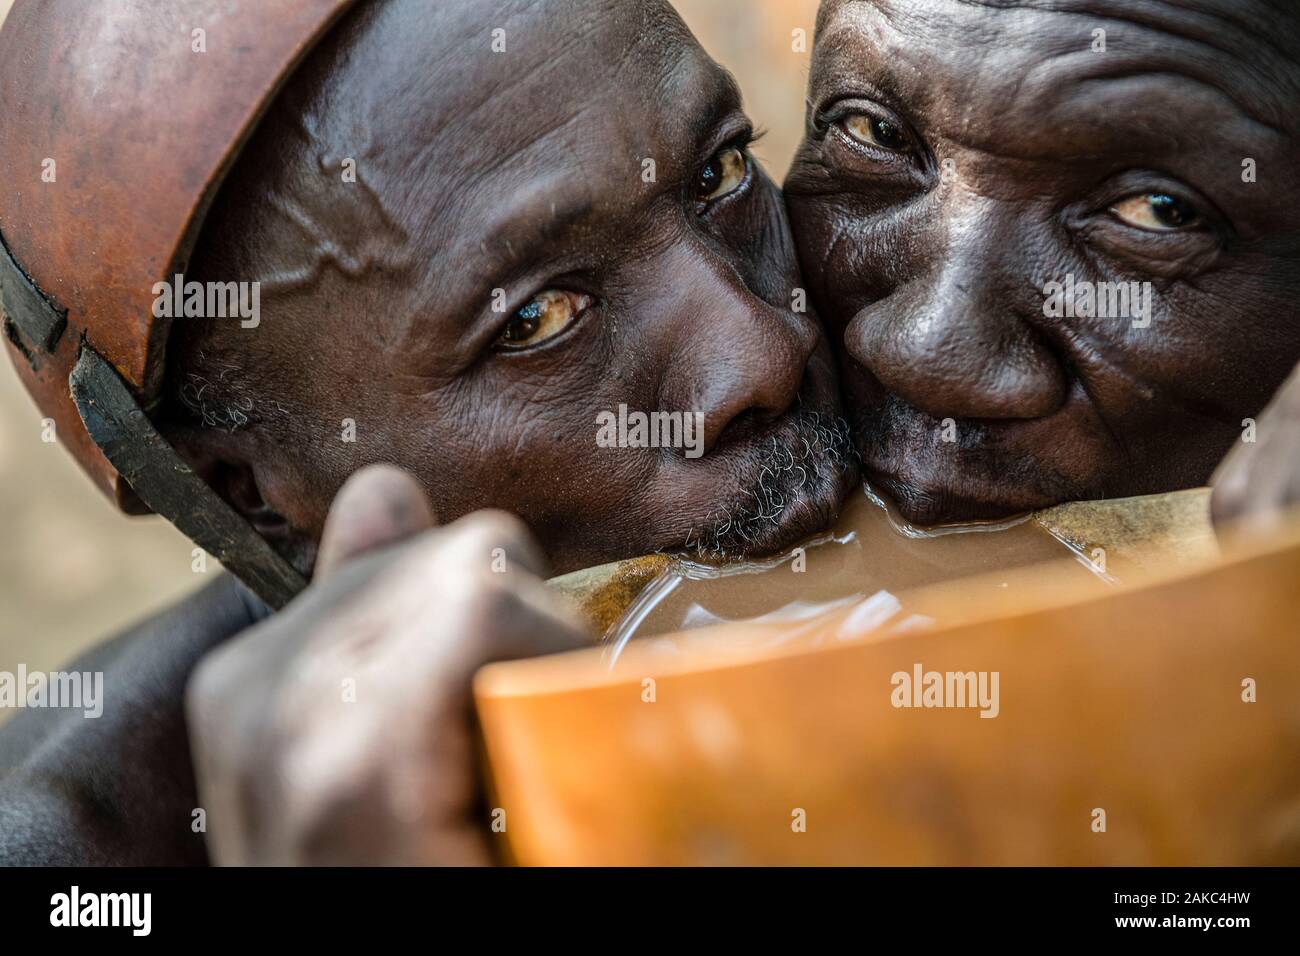 Benin, Nothern distict, Atacora mountains area, Copargo, Taneka tribe traditional healers drinking together millet beer called Tchoukoutou Stock Photo